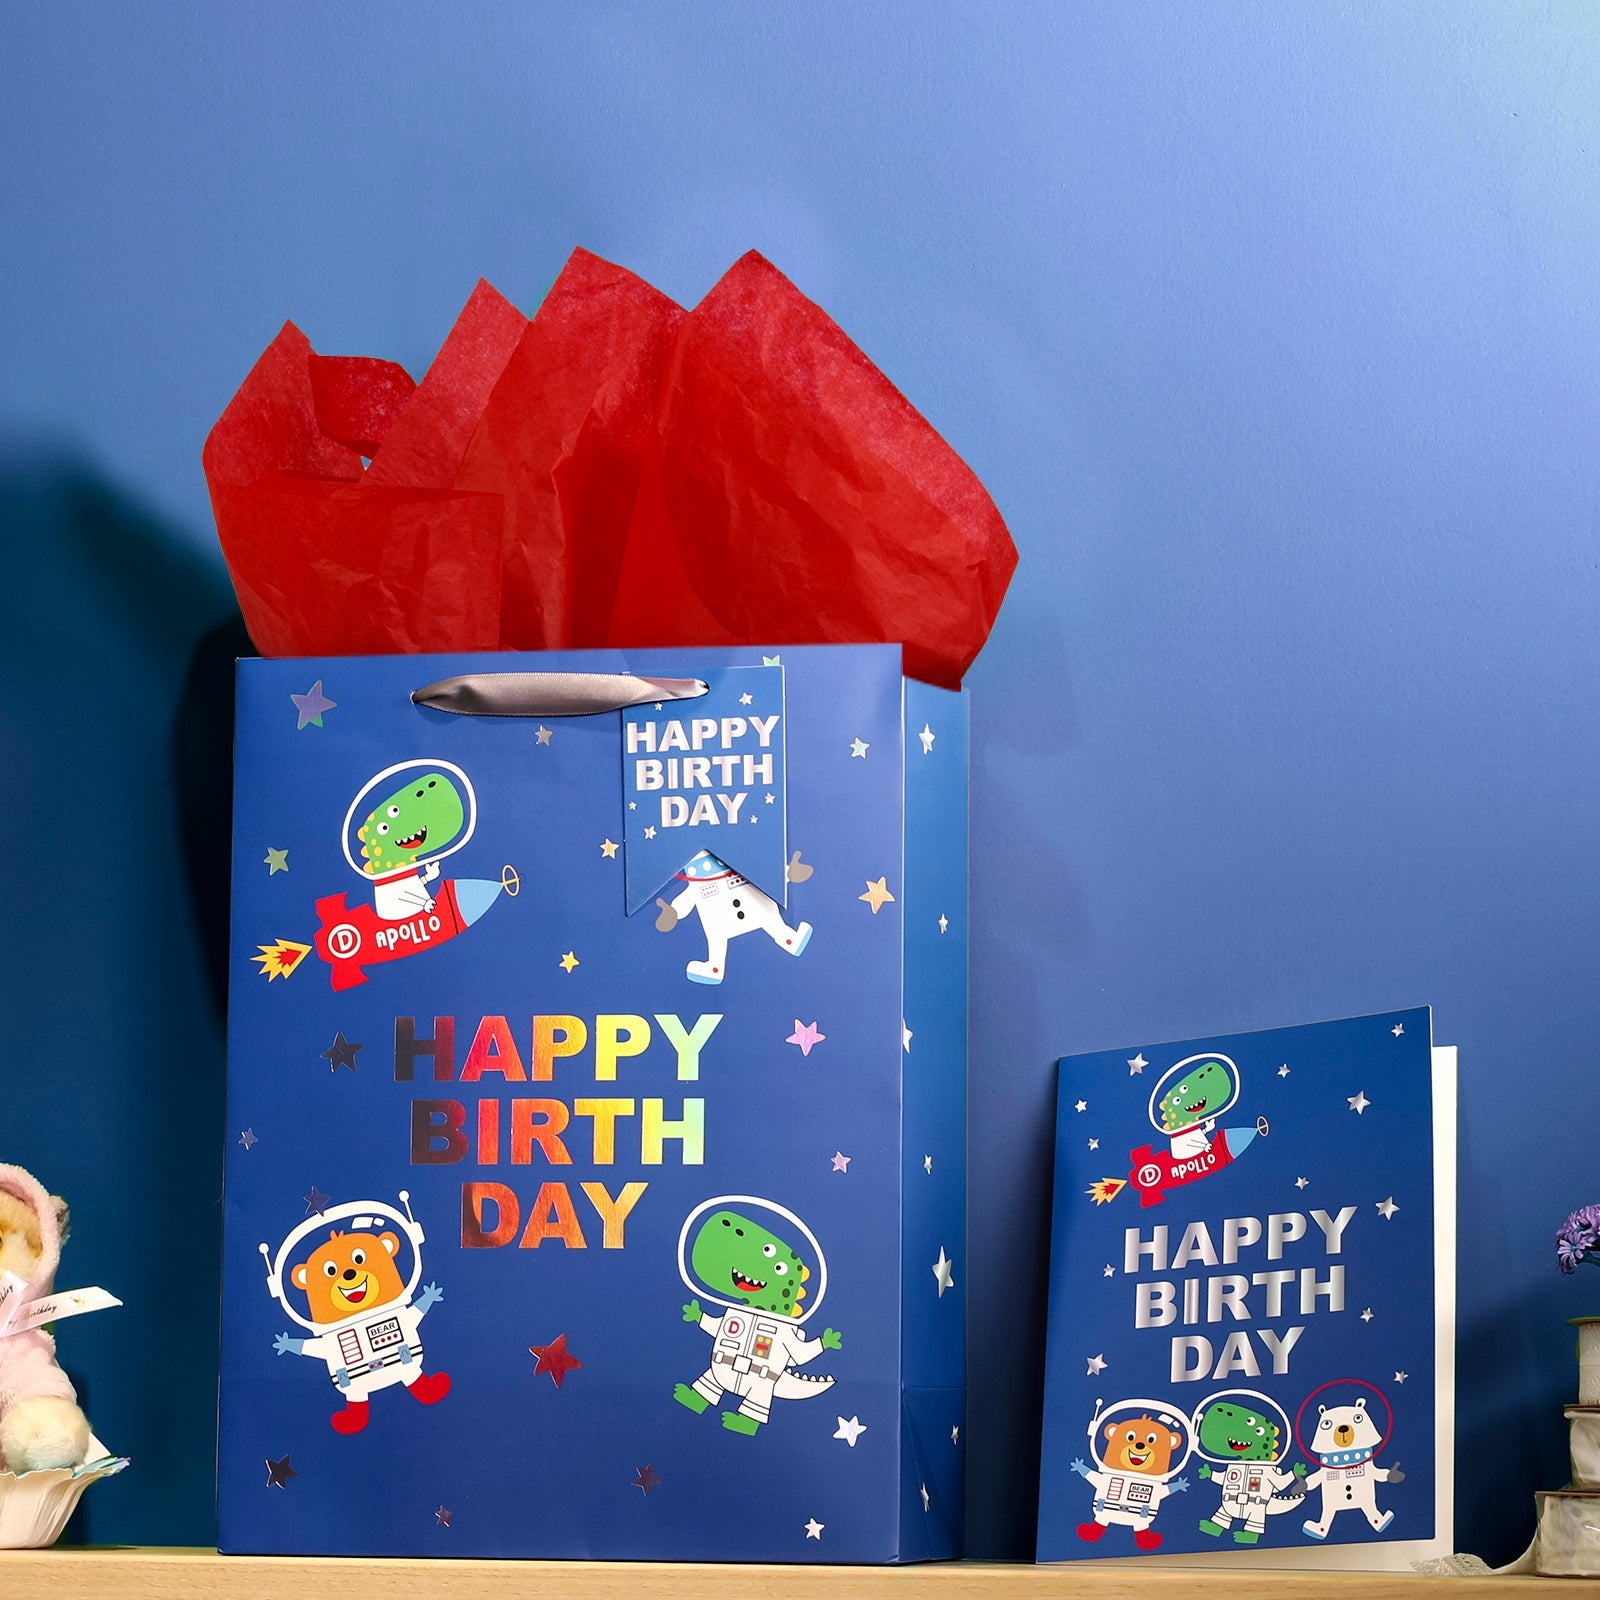 13 inch Large Gift Bag with Birthday Card  & Tissue Paper for Boy - Dinosaur Astronaut Design for Boys